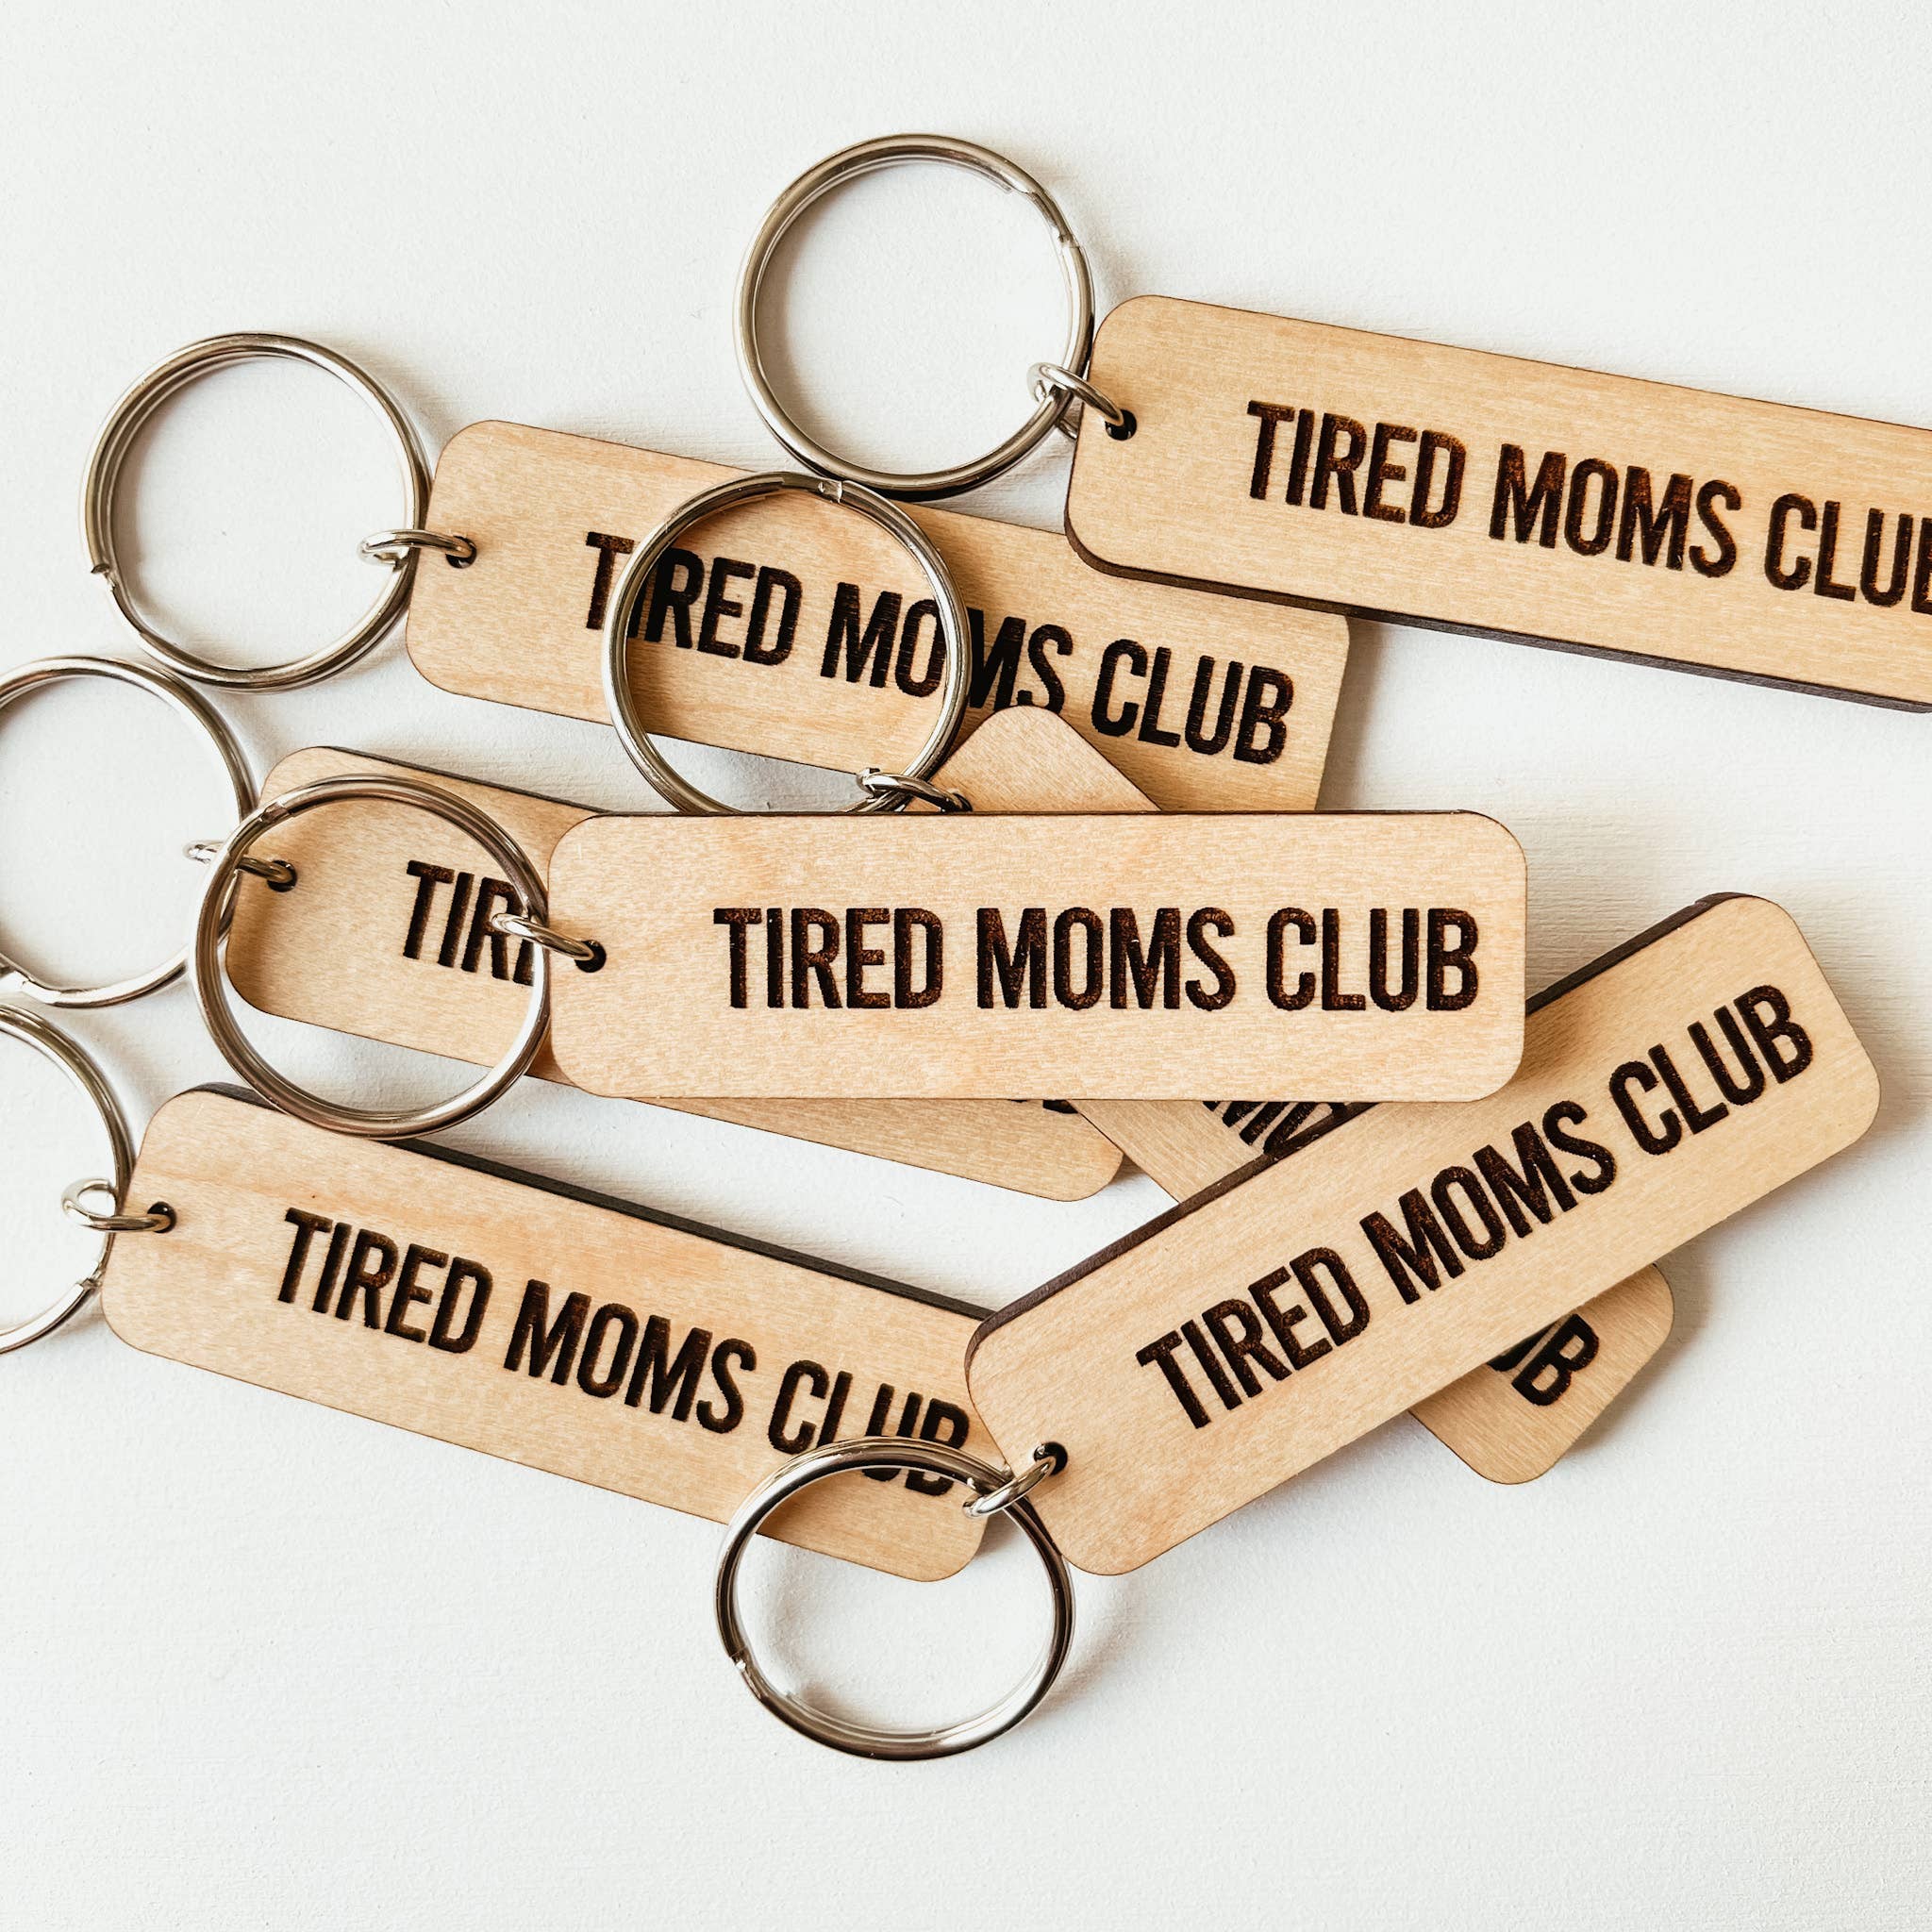 Knotty Design Co. | Tired Moms Club Wooden Keychain